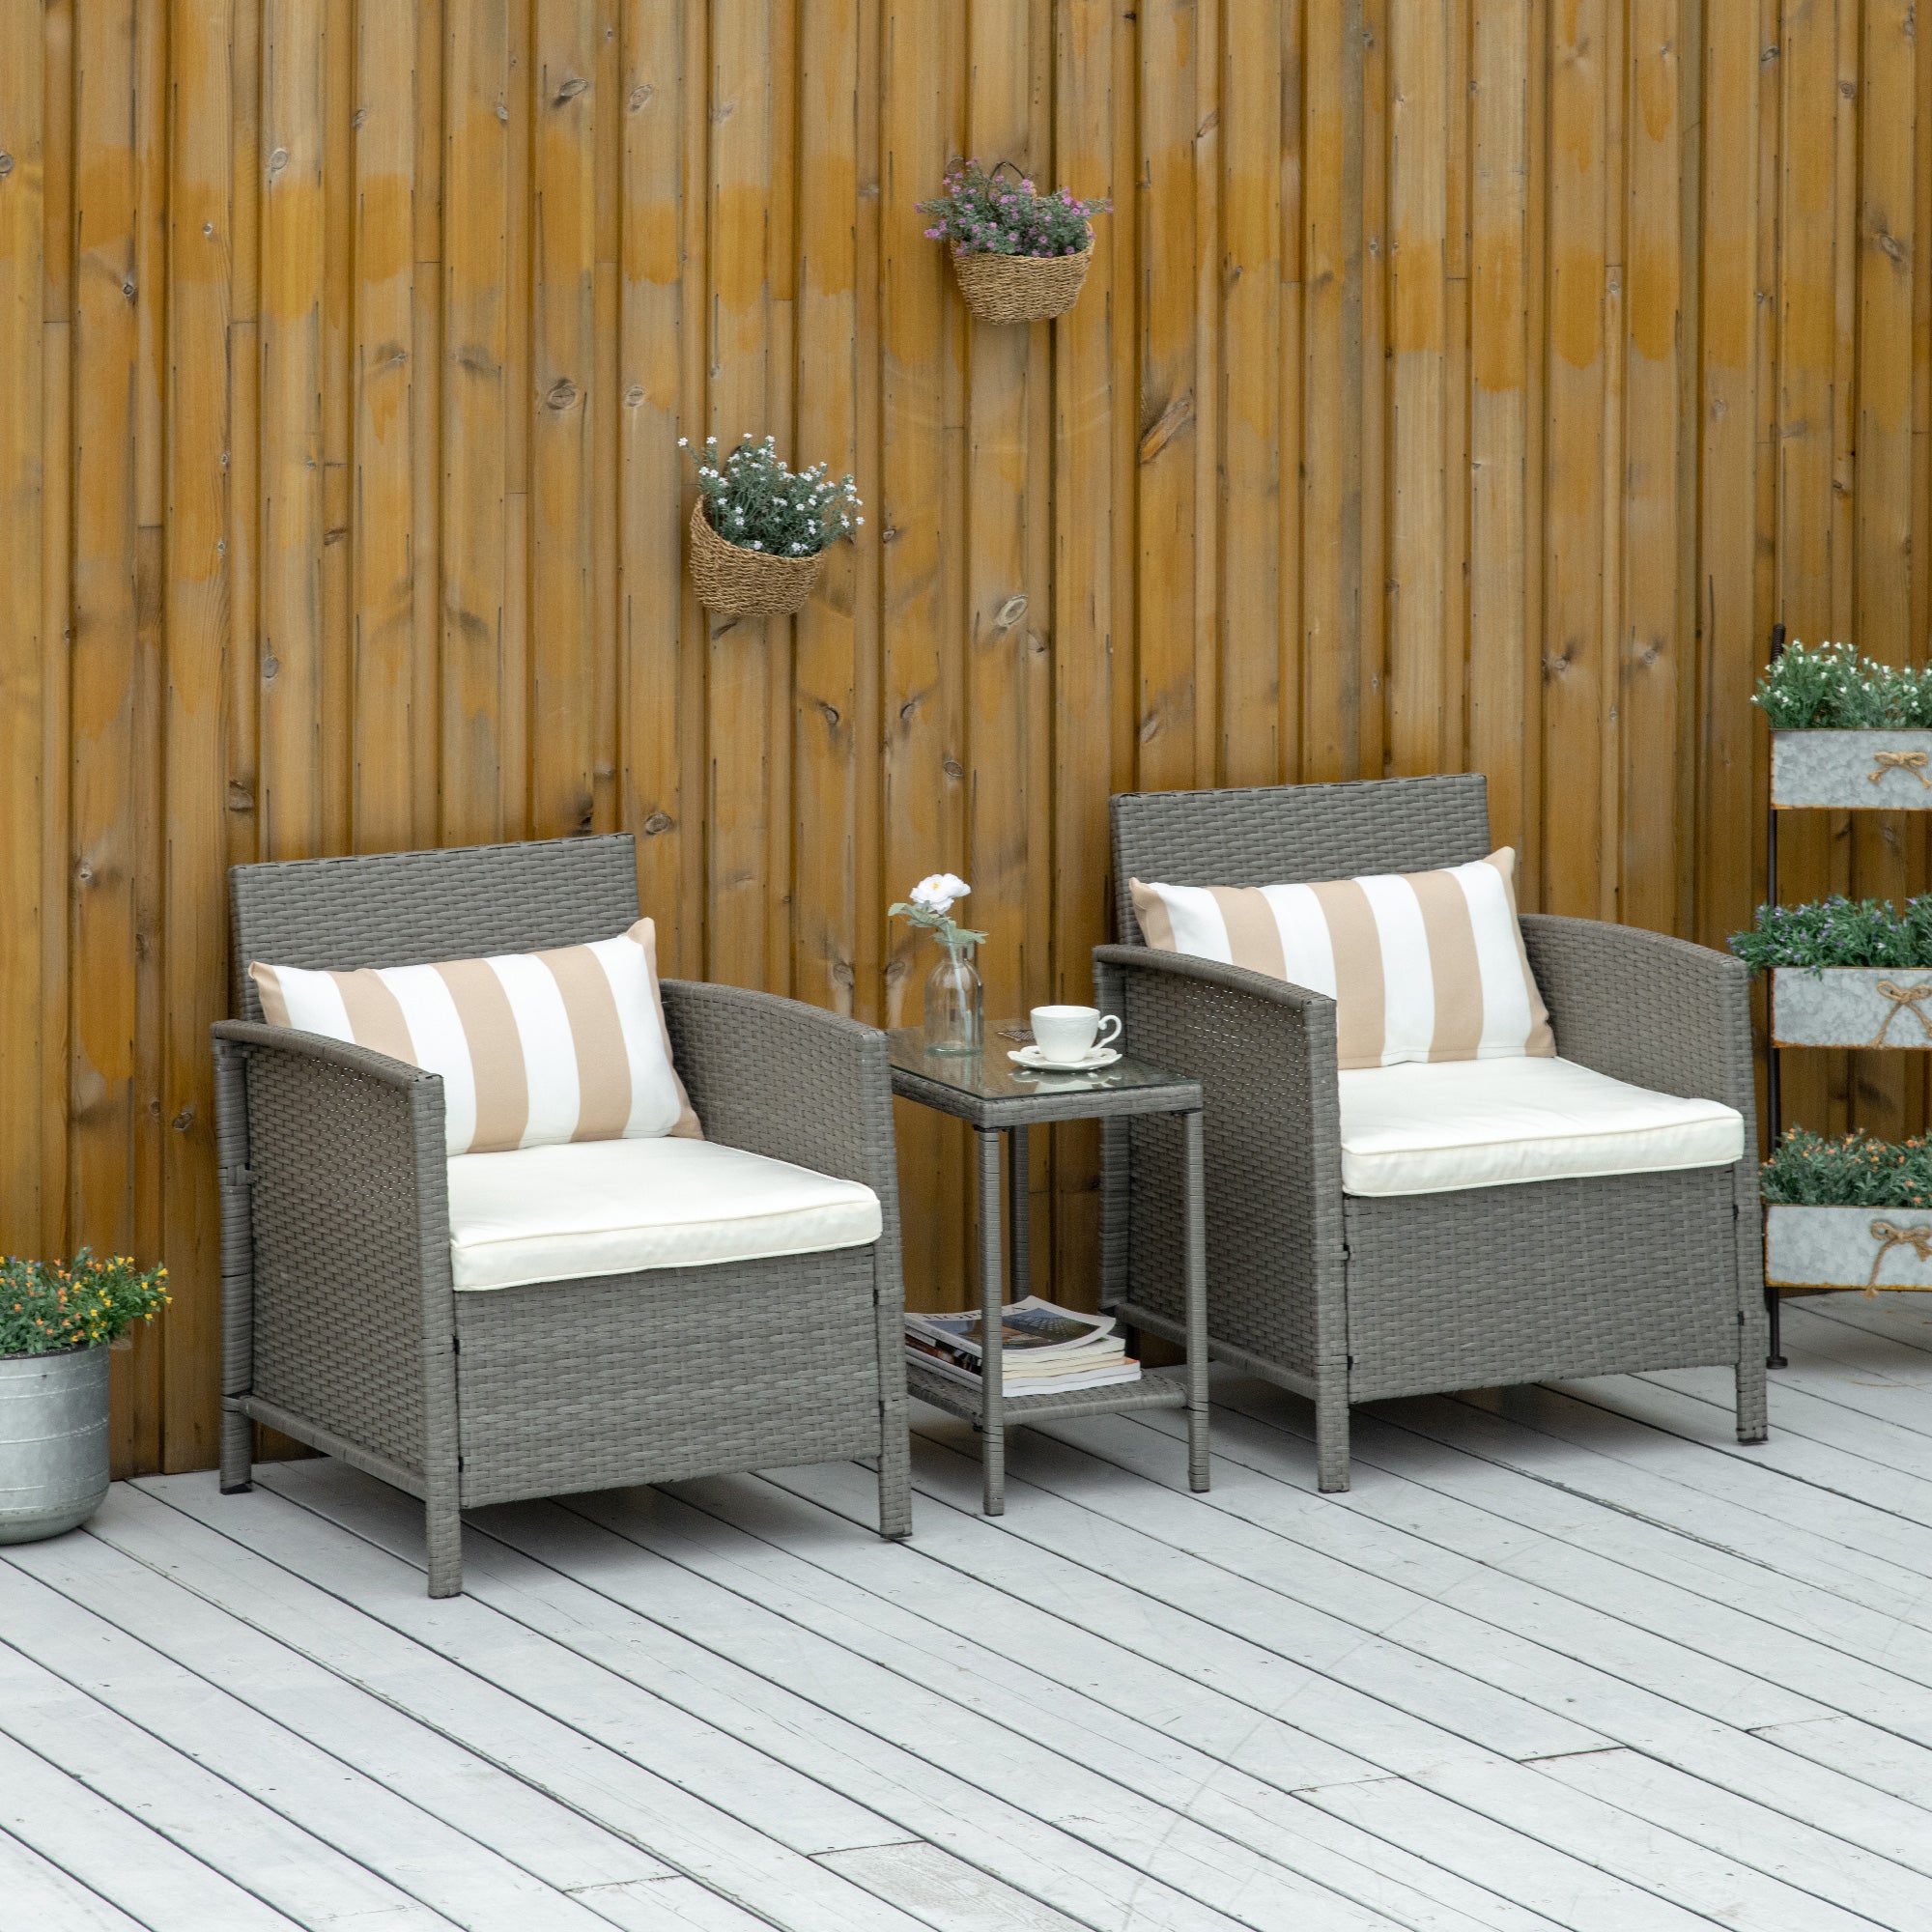 Outsunny Rattan Garden Furniture 3 Pieces Patio Bistro Set Wicker Weave Conservatory Sofa Chair & Table Set with Cushion Pillow - Light Grey - Inspirely